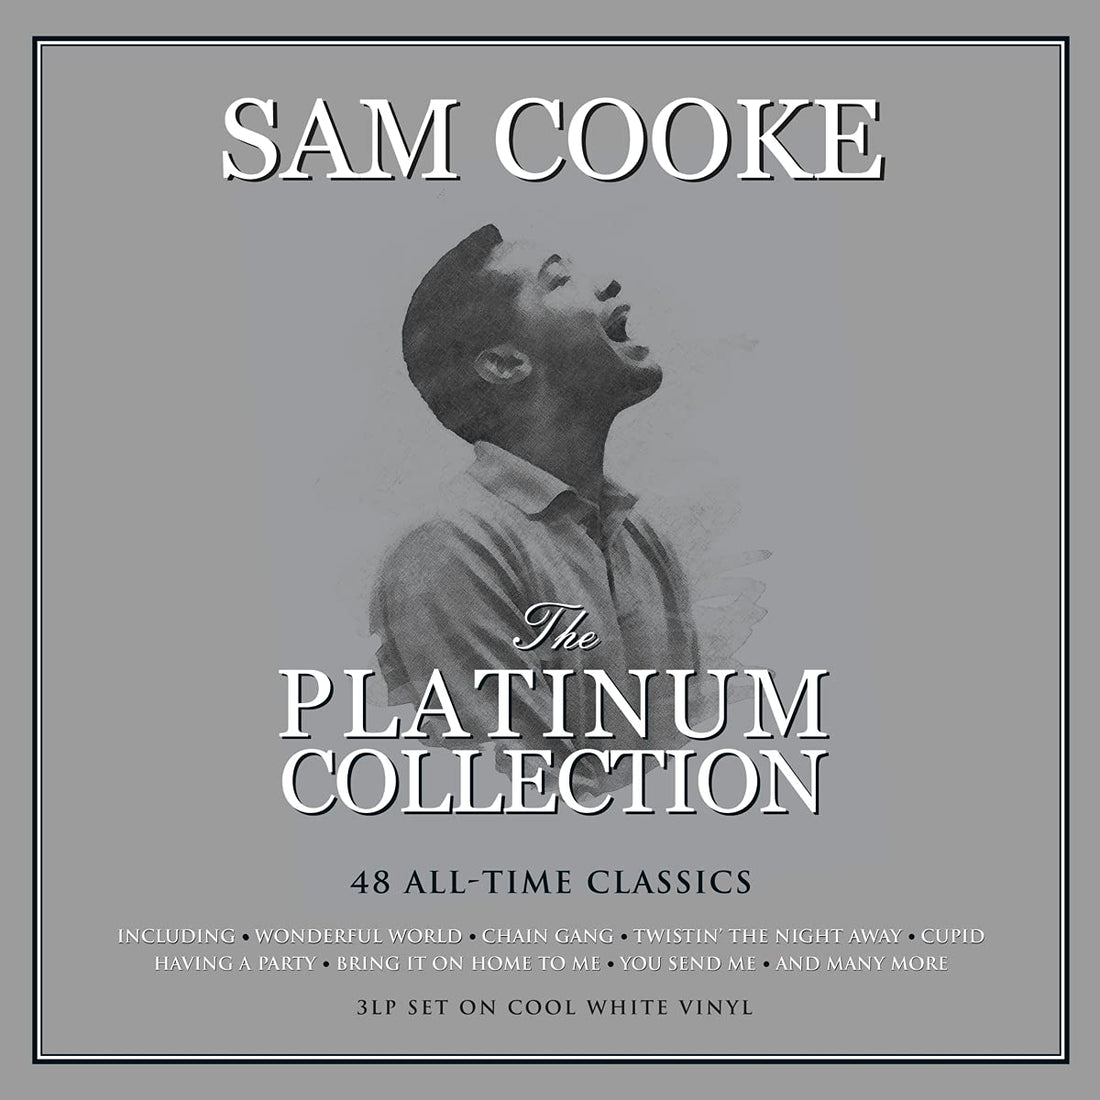 Sam Cooke- The Platinum Collection